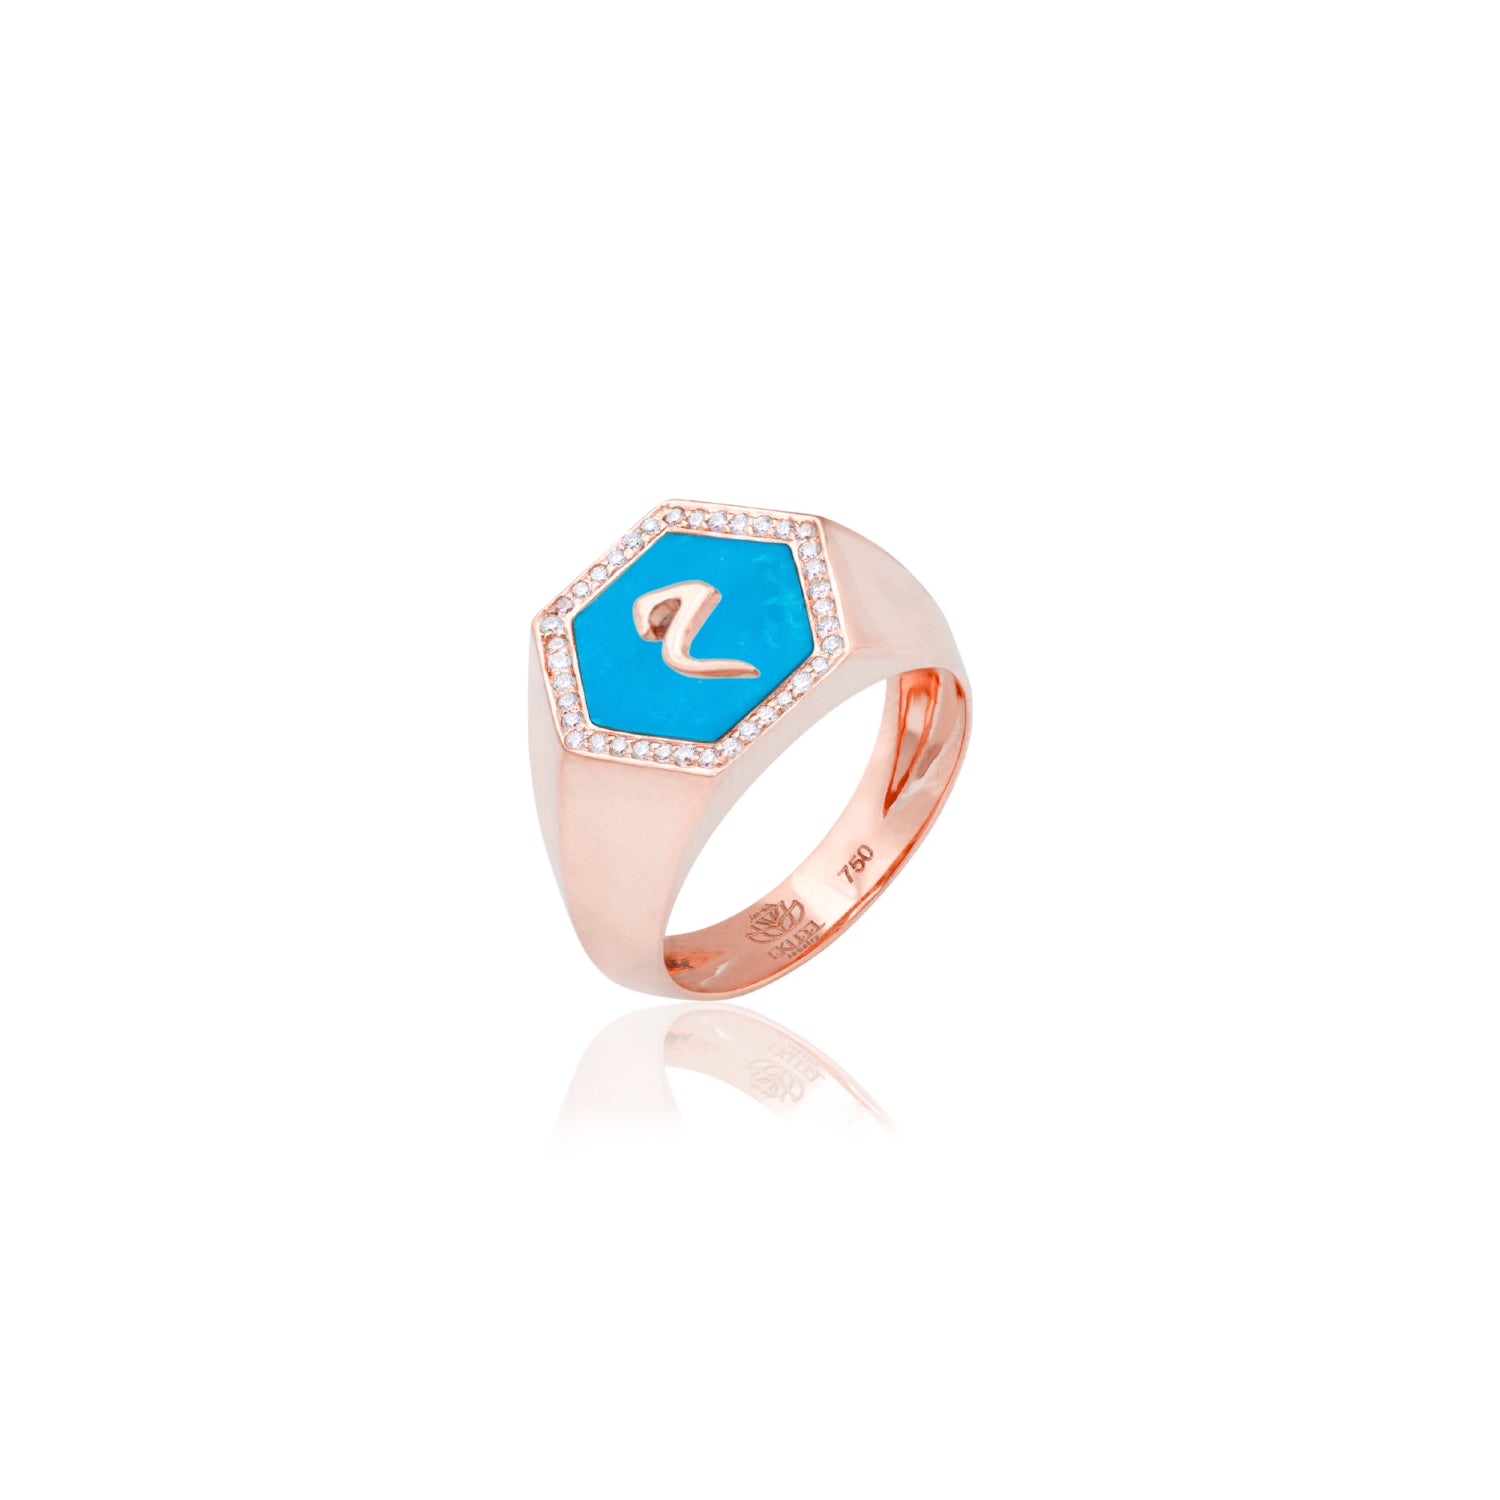 Qamoos 2.0 Letter م Turquoise and Diamond Signet Ring in Rose Gold